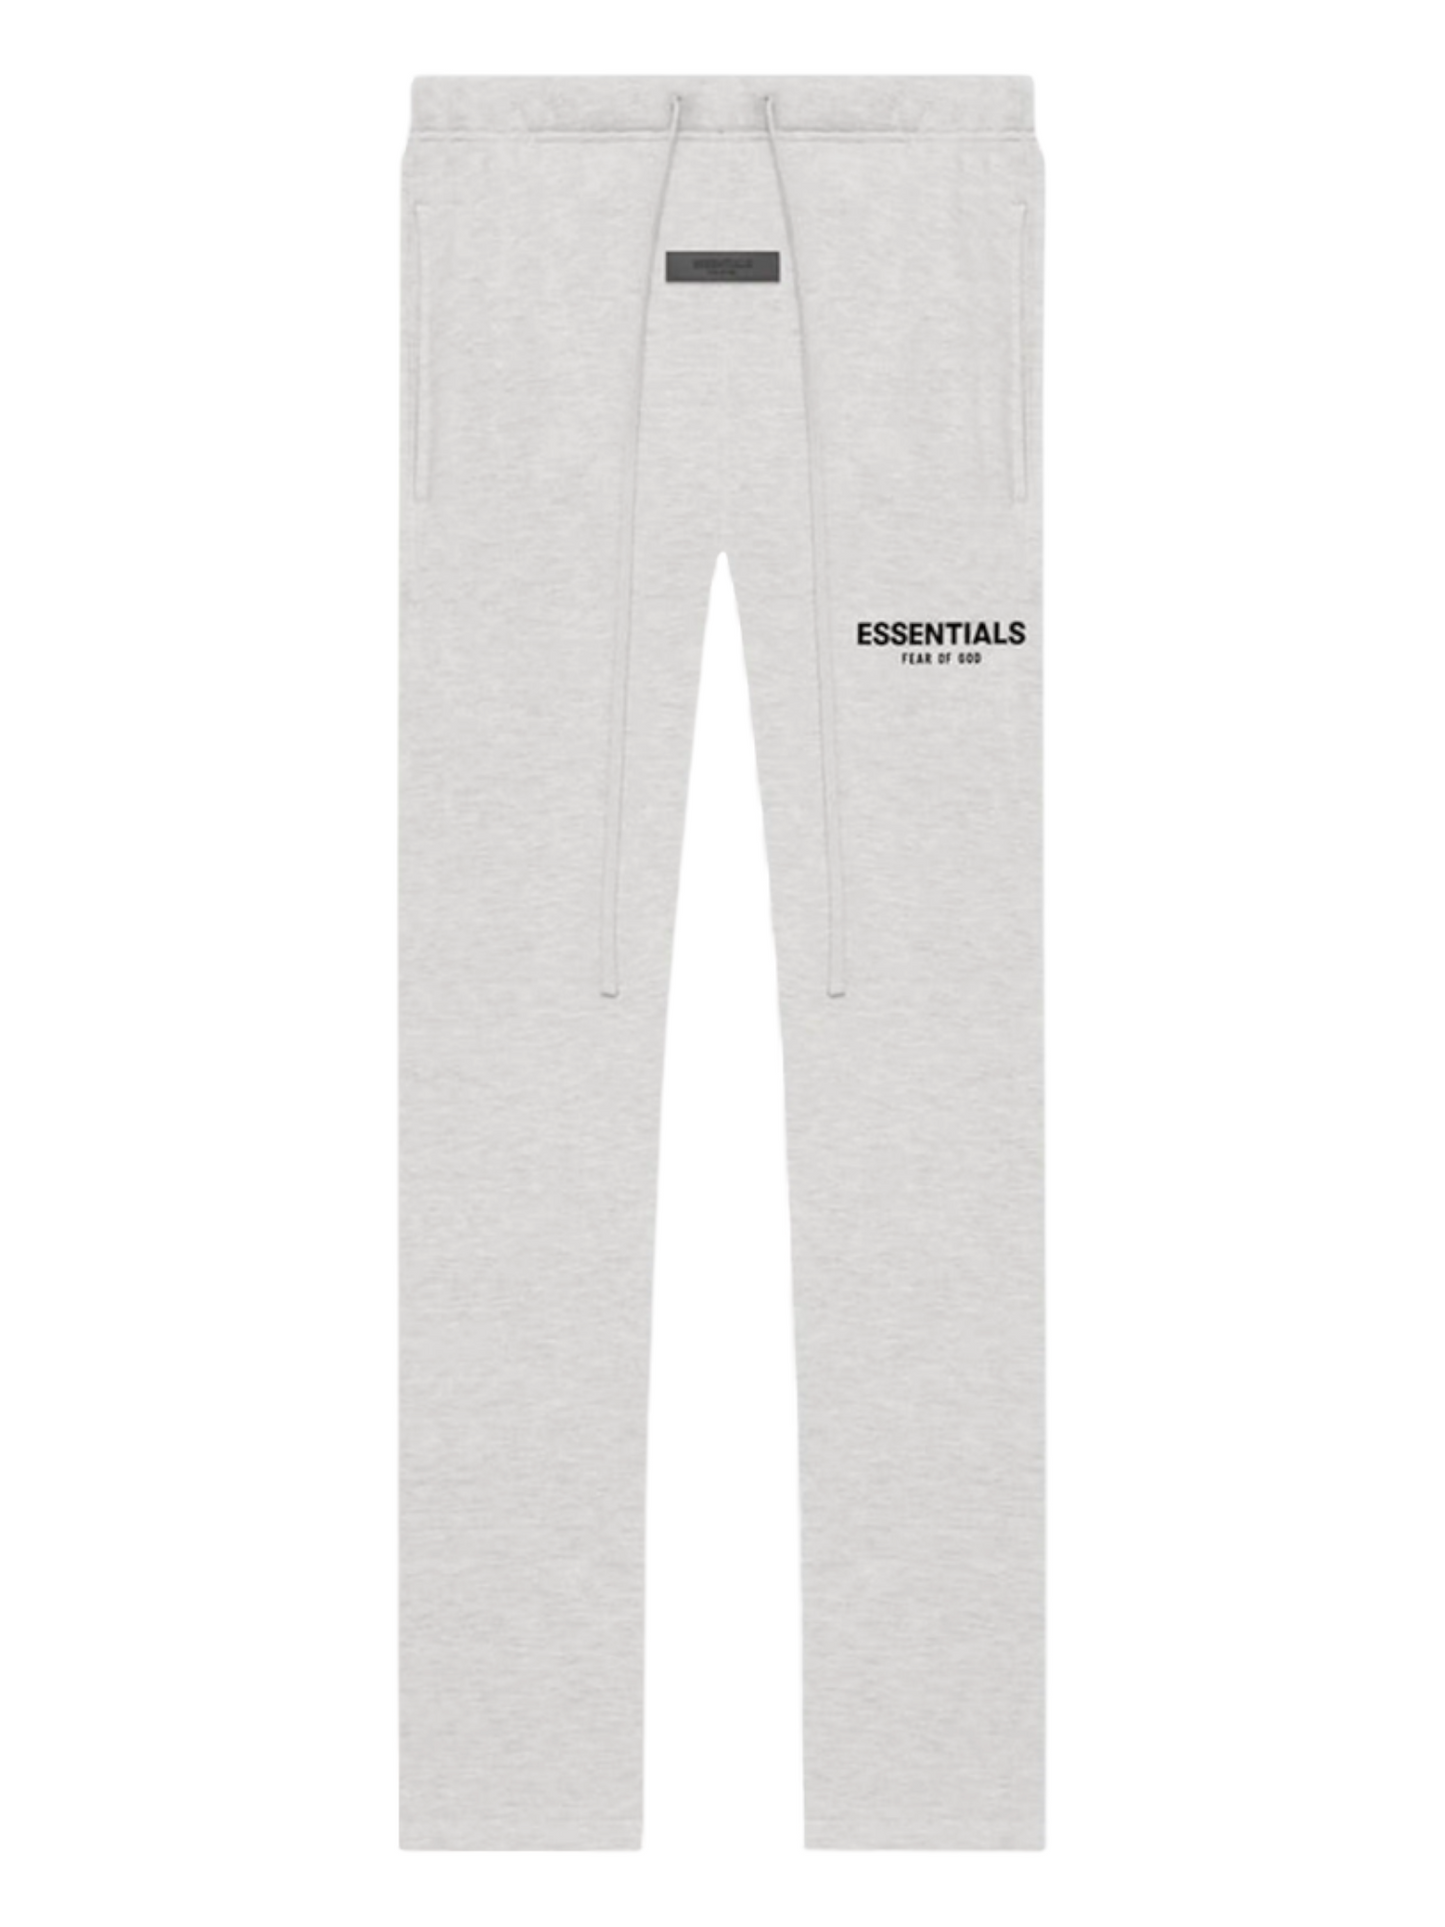 Essentials Fear of God Light Oatmeal Fleece Relaxed Sweatpants FW22 — Genuine Design Luxury Consignment for Men. New & Pre-Owned Clothing, Shoes, & Accessories. Calgary, Canada